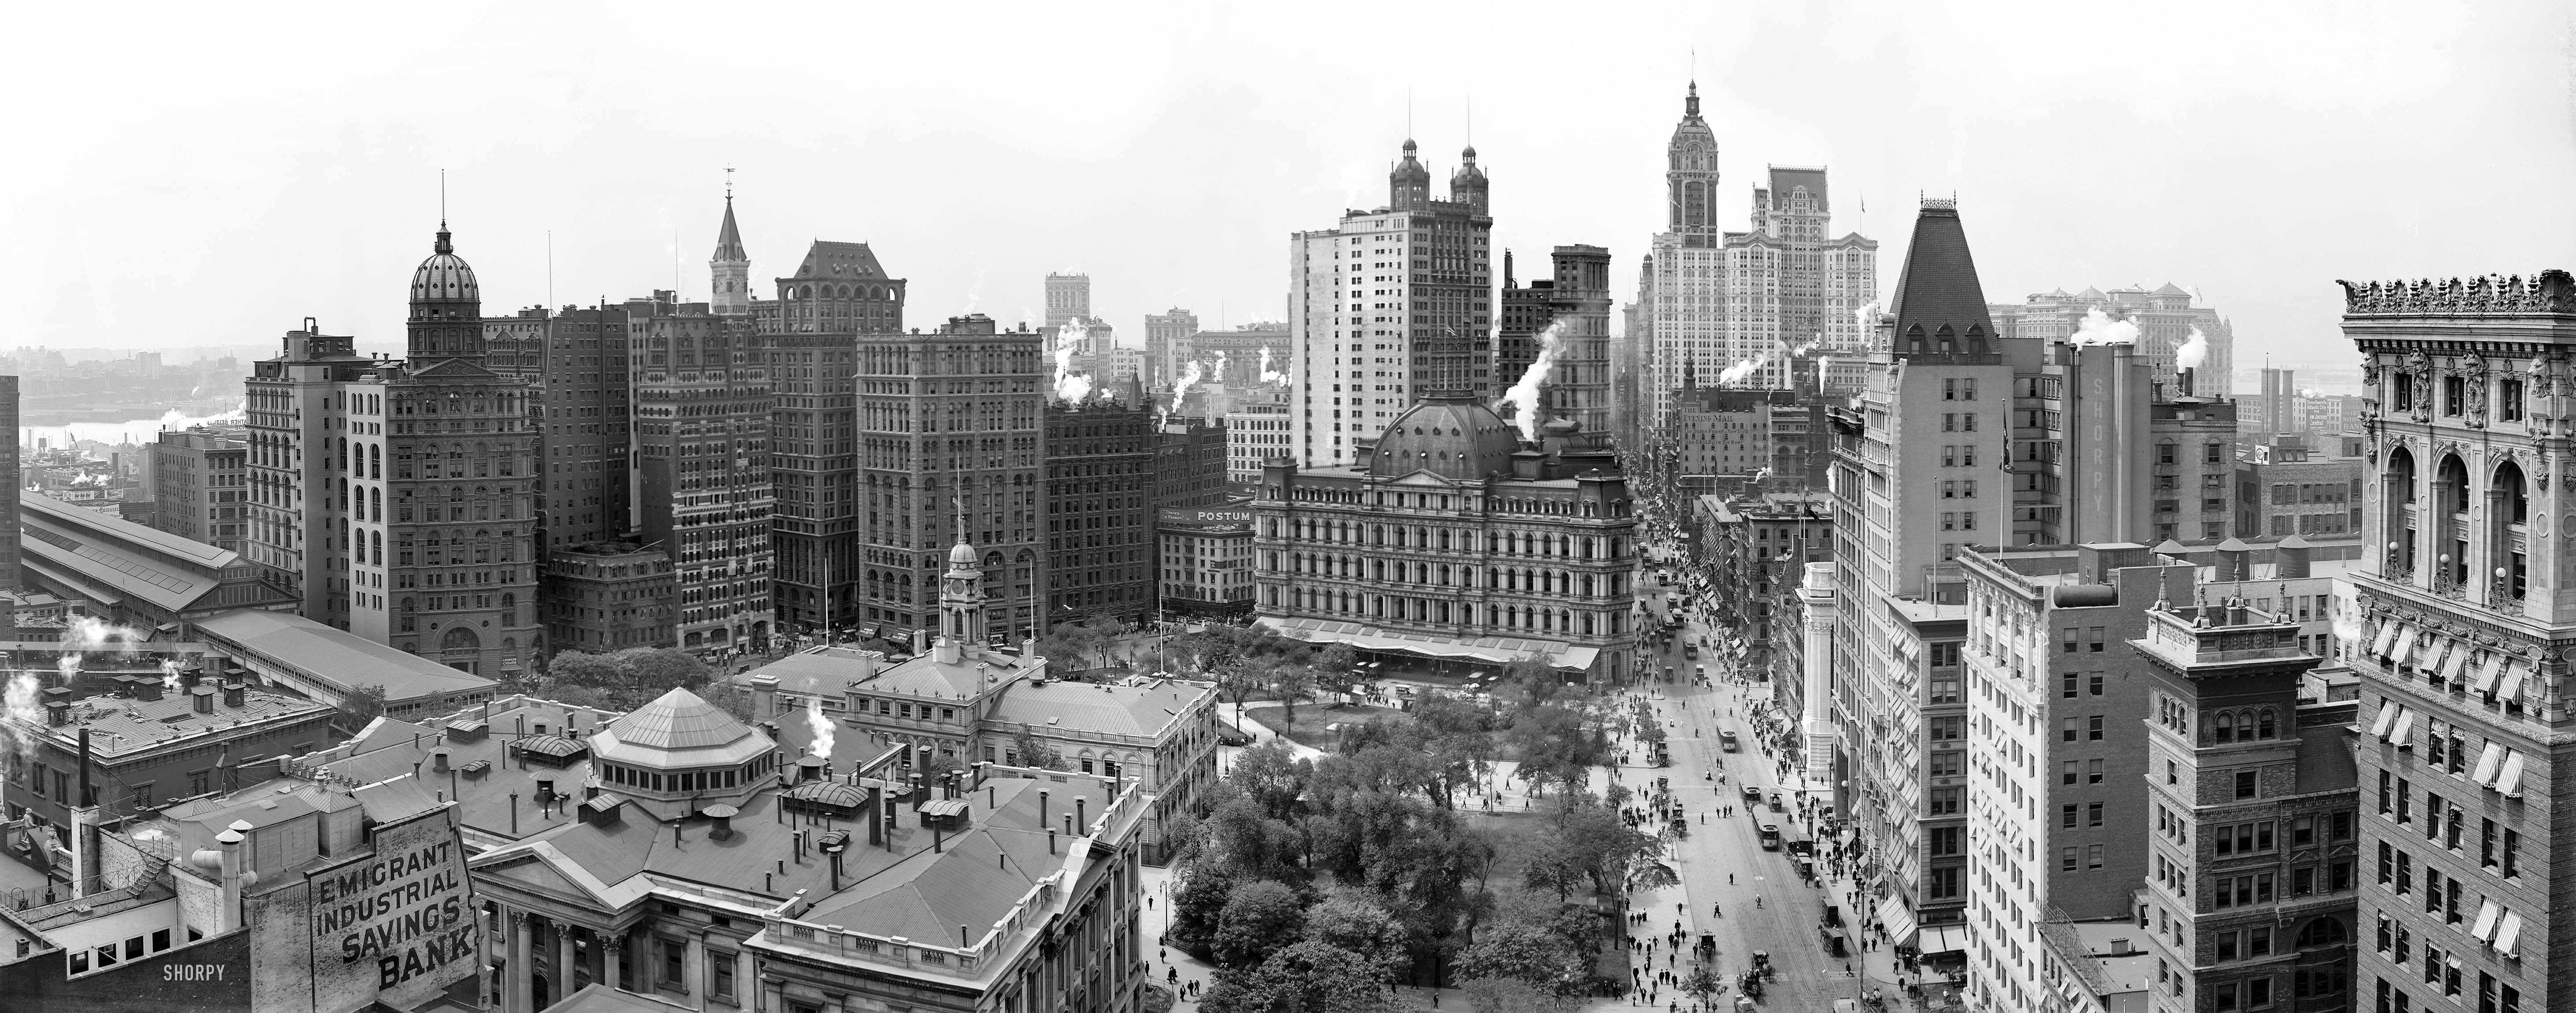 Manhattan circa 1908. "The Heart of New York." Landmarks in this panorama of four 8x10 glass plates include Broadway, City Hall Park, the City Hall Post Office, the Singer, Park Row, Home Life Insurance and City Investing buildings and, far left, Manhattan Terminal. Note the observer taking in the scene from the cupola atop the domed New York World building. Detroit Publishing Co. View full size.